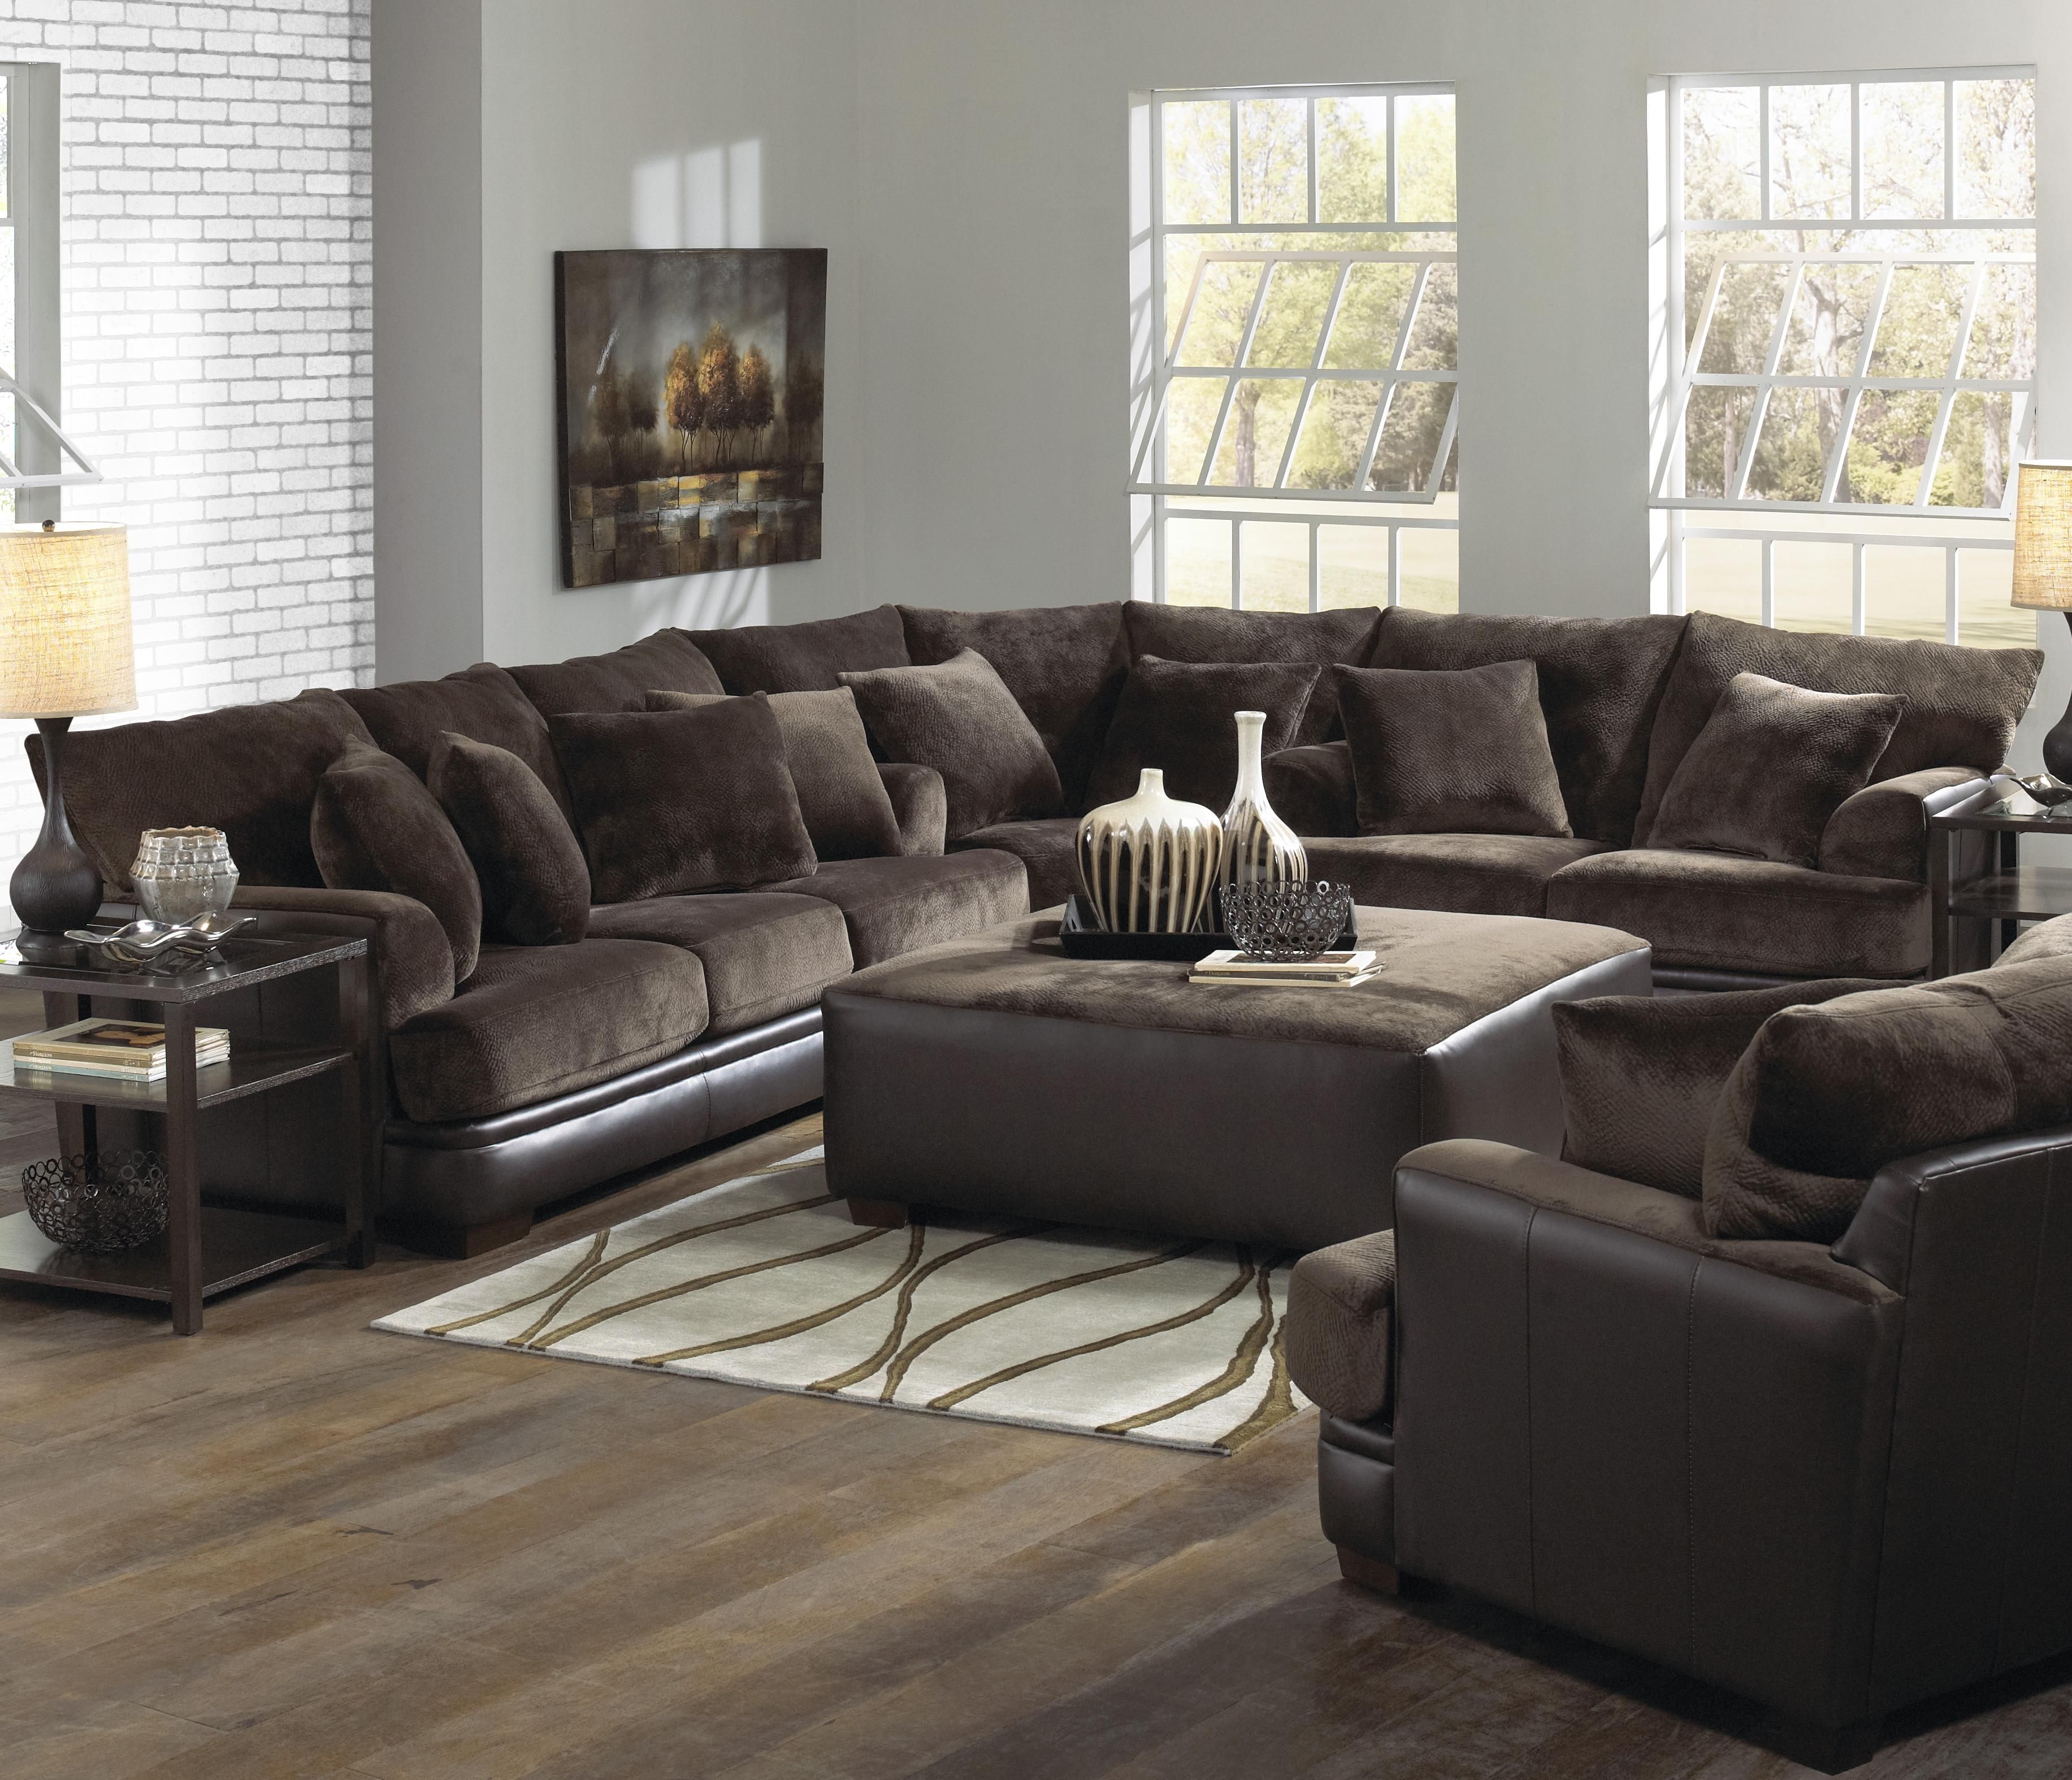 Barkley Large L Shaped Sectional Sofa With Right Side Loveseat In Cozy Sectional Sofas (View 6 of 12)